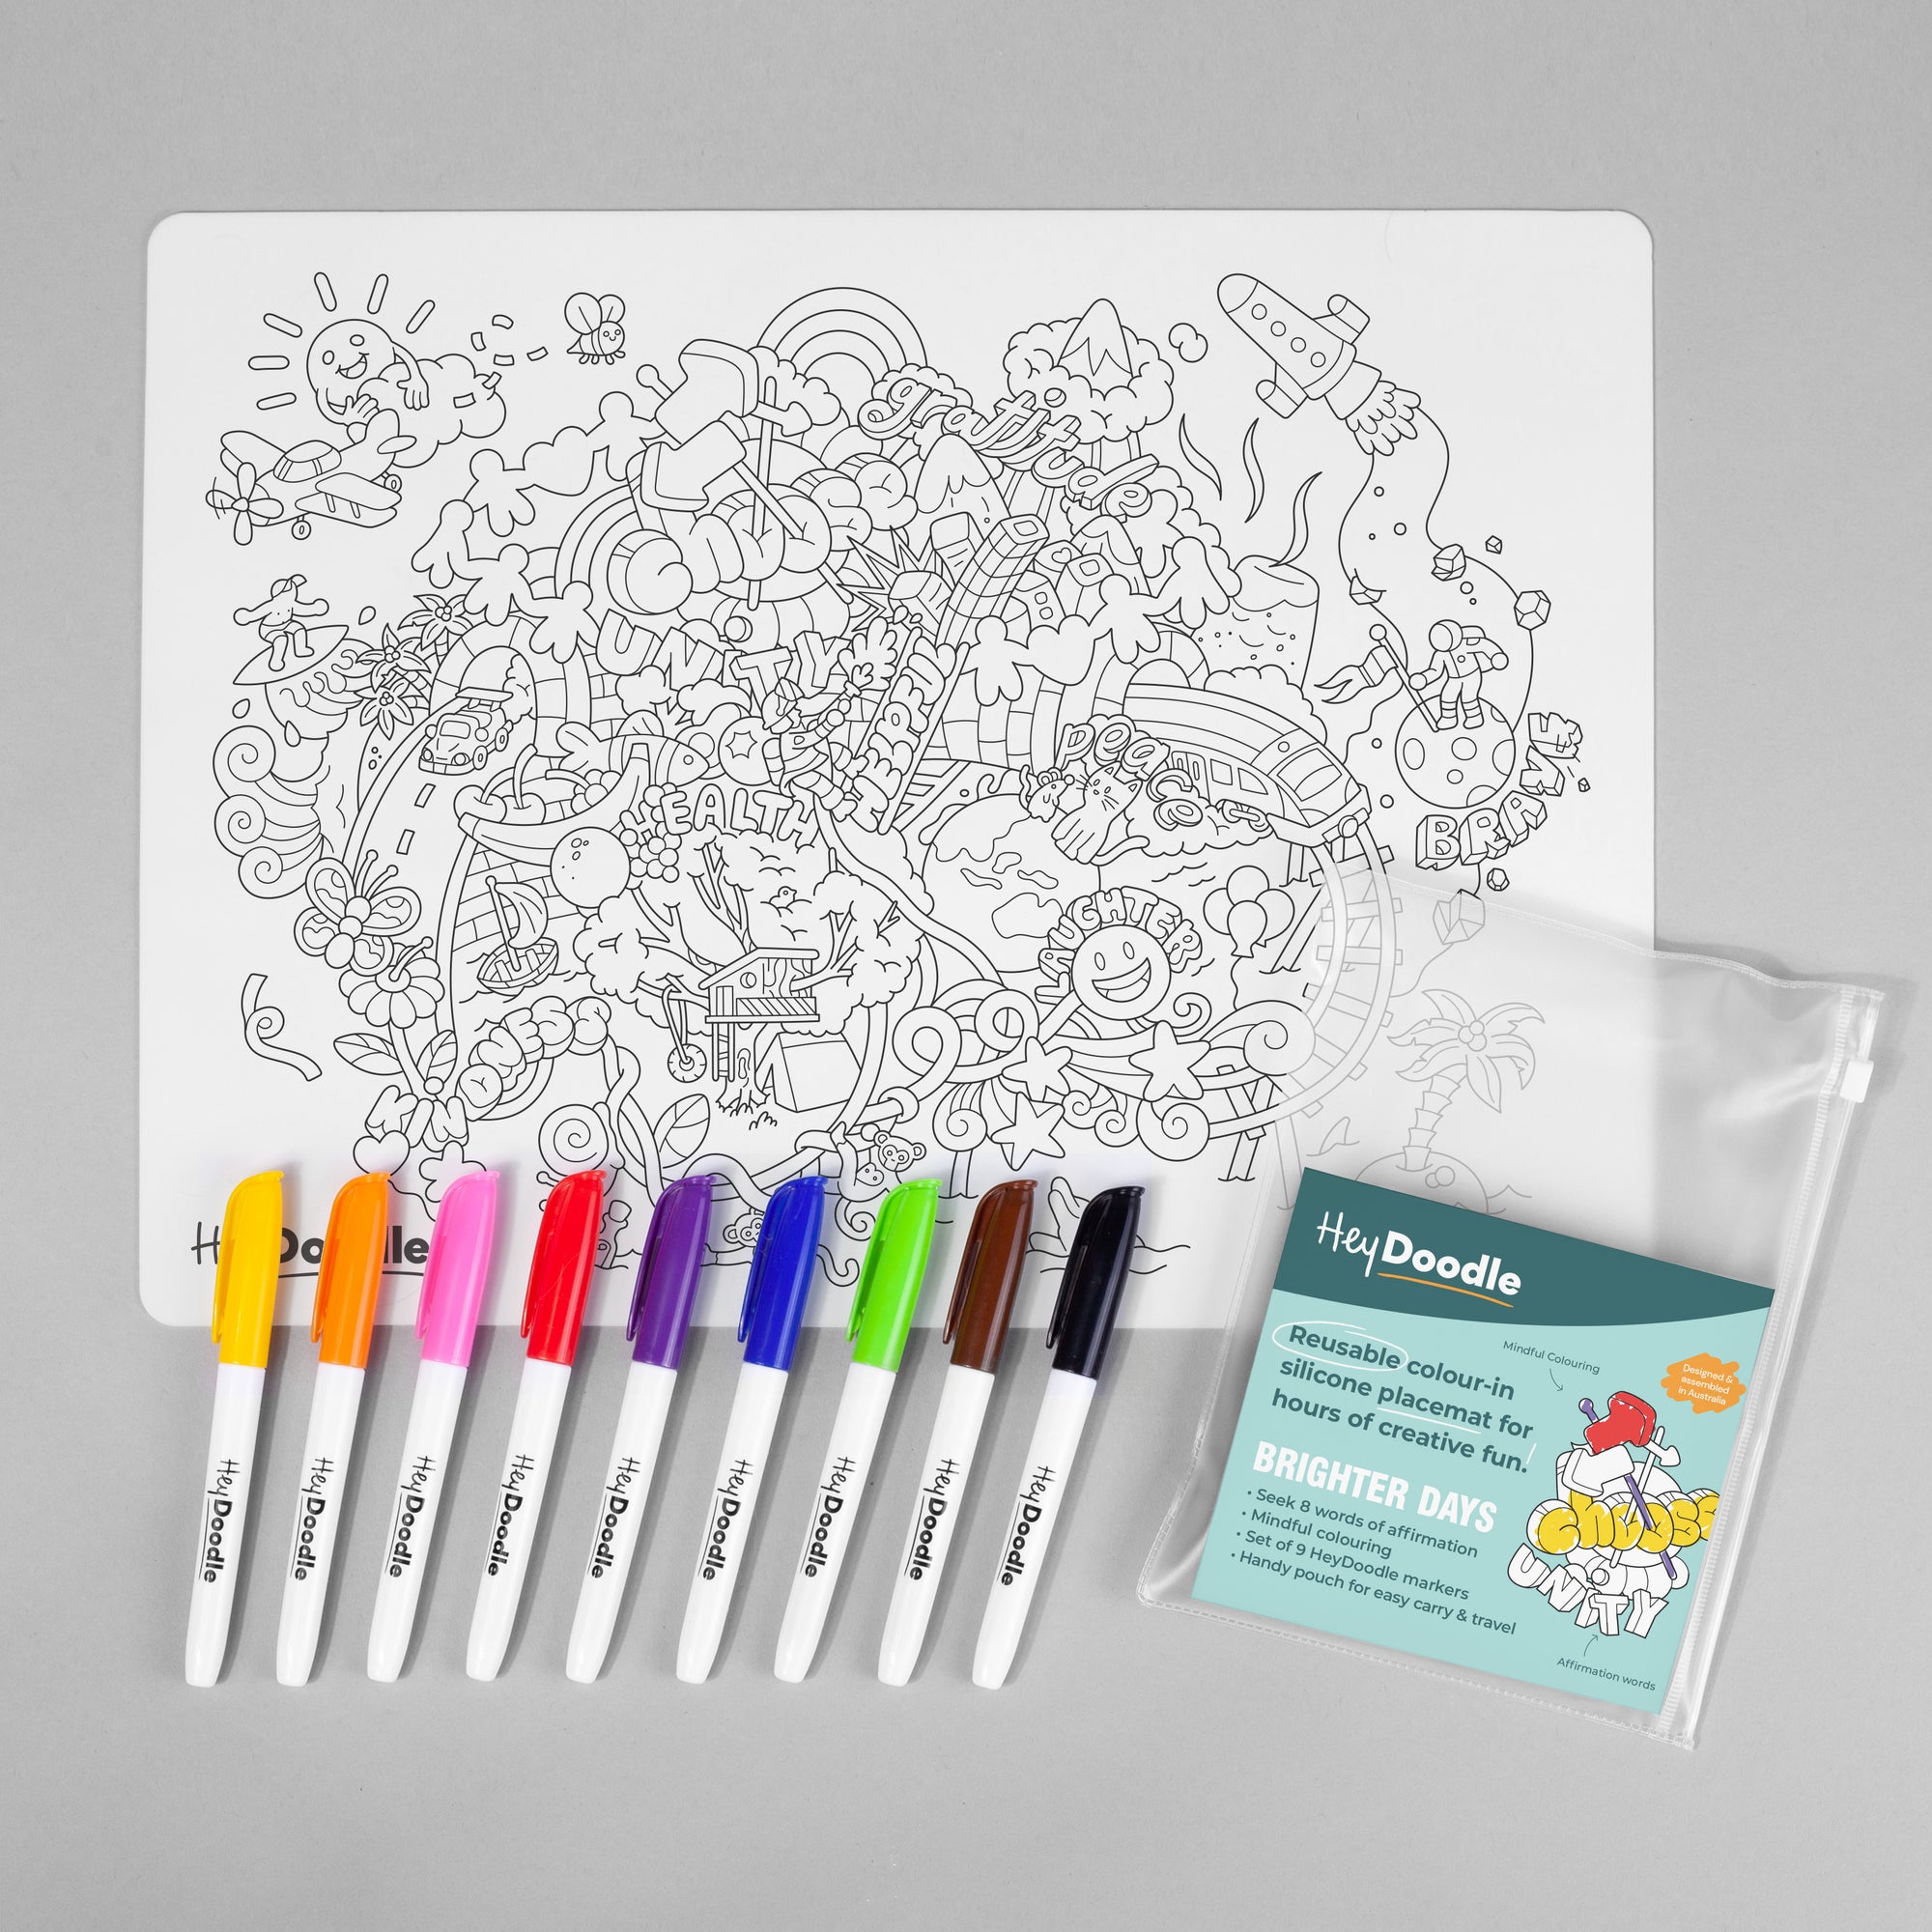 Hey doodle silicone colouring mat - angus and dudley